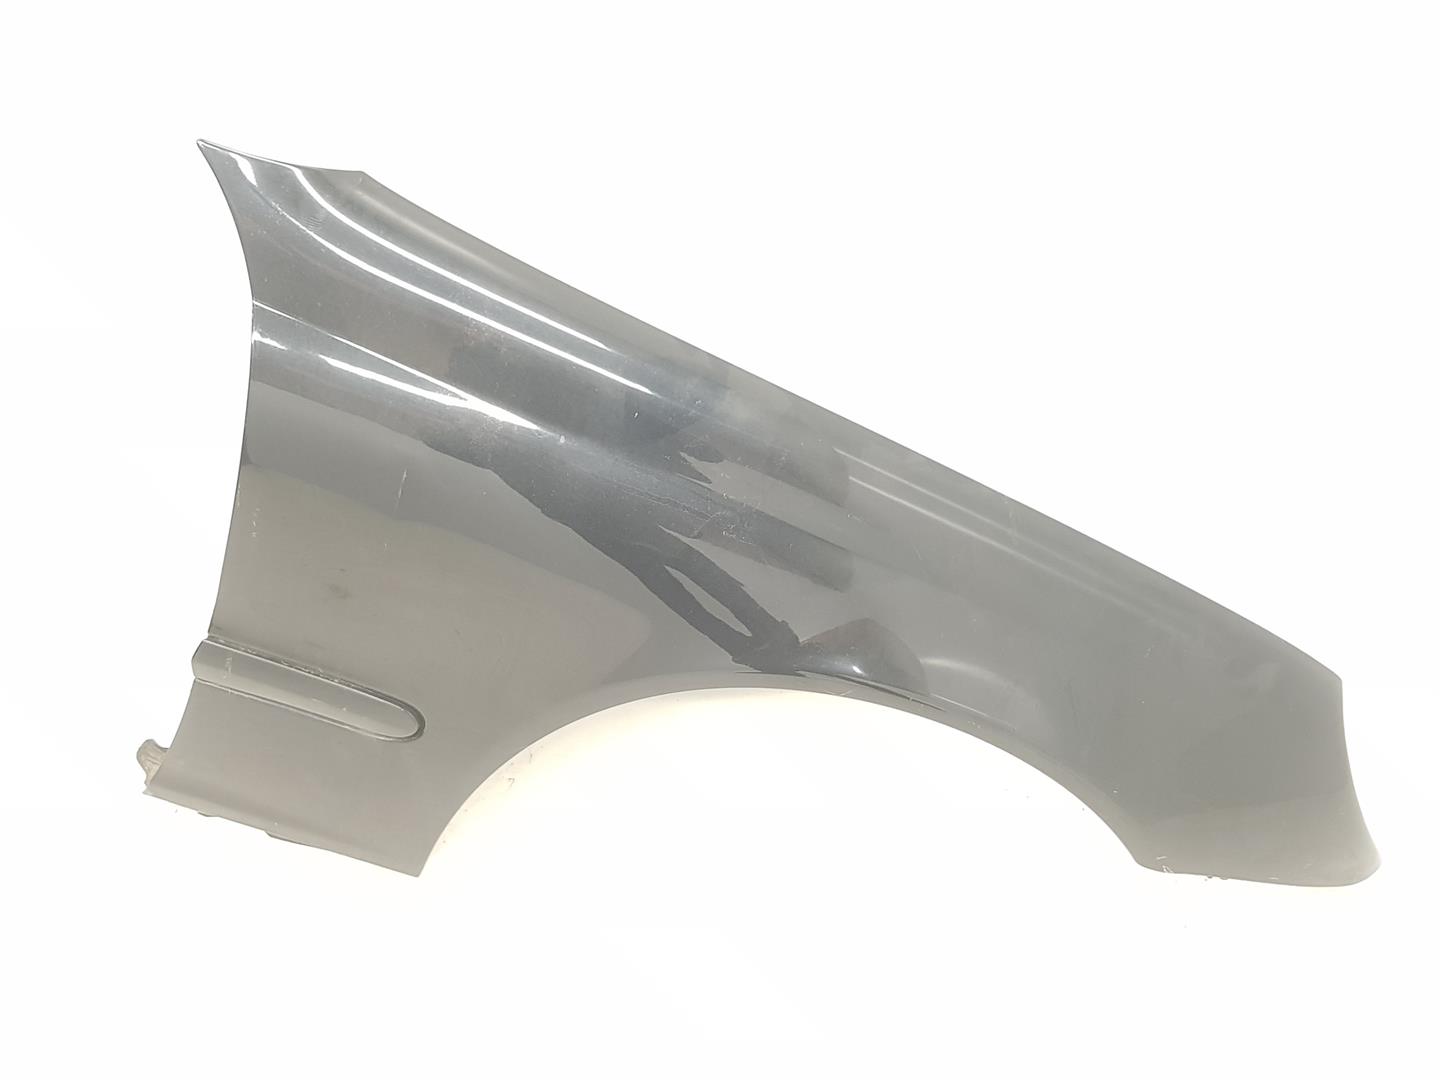 MERCEDES-BENZ C-Class W203/S203/CL203 (2000-2008) Front Right Fender A2038800218, A2038800218, COLORNEGRO197 19924585